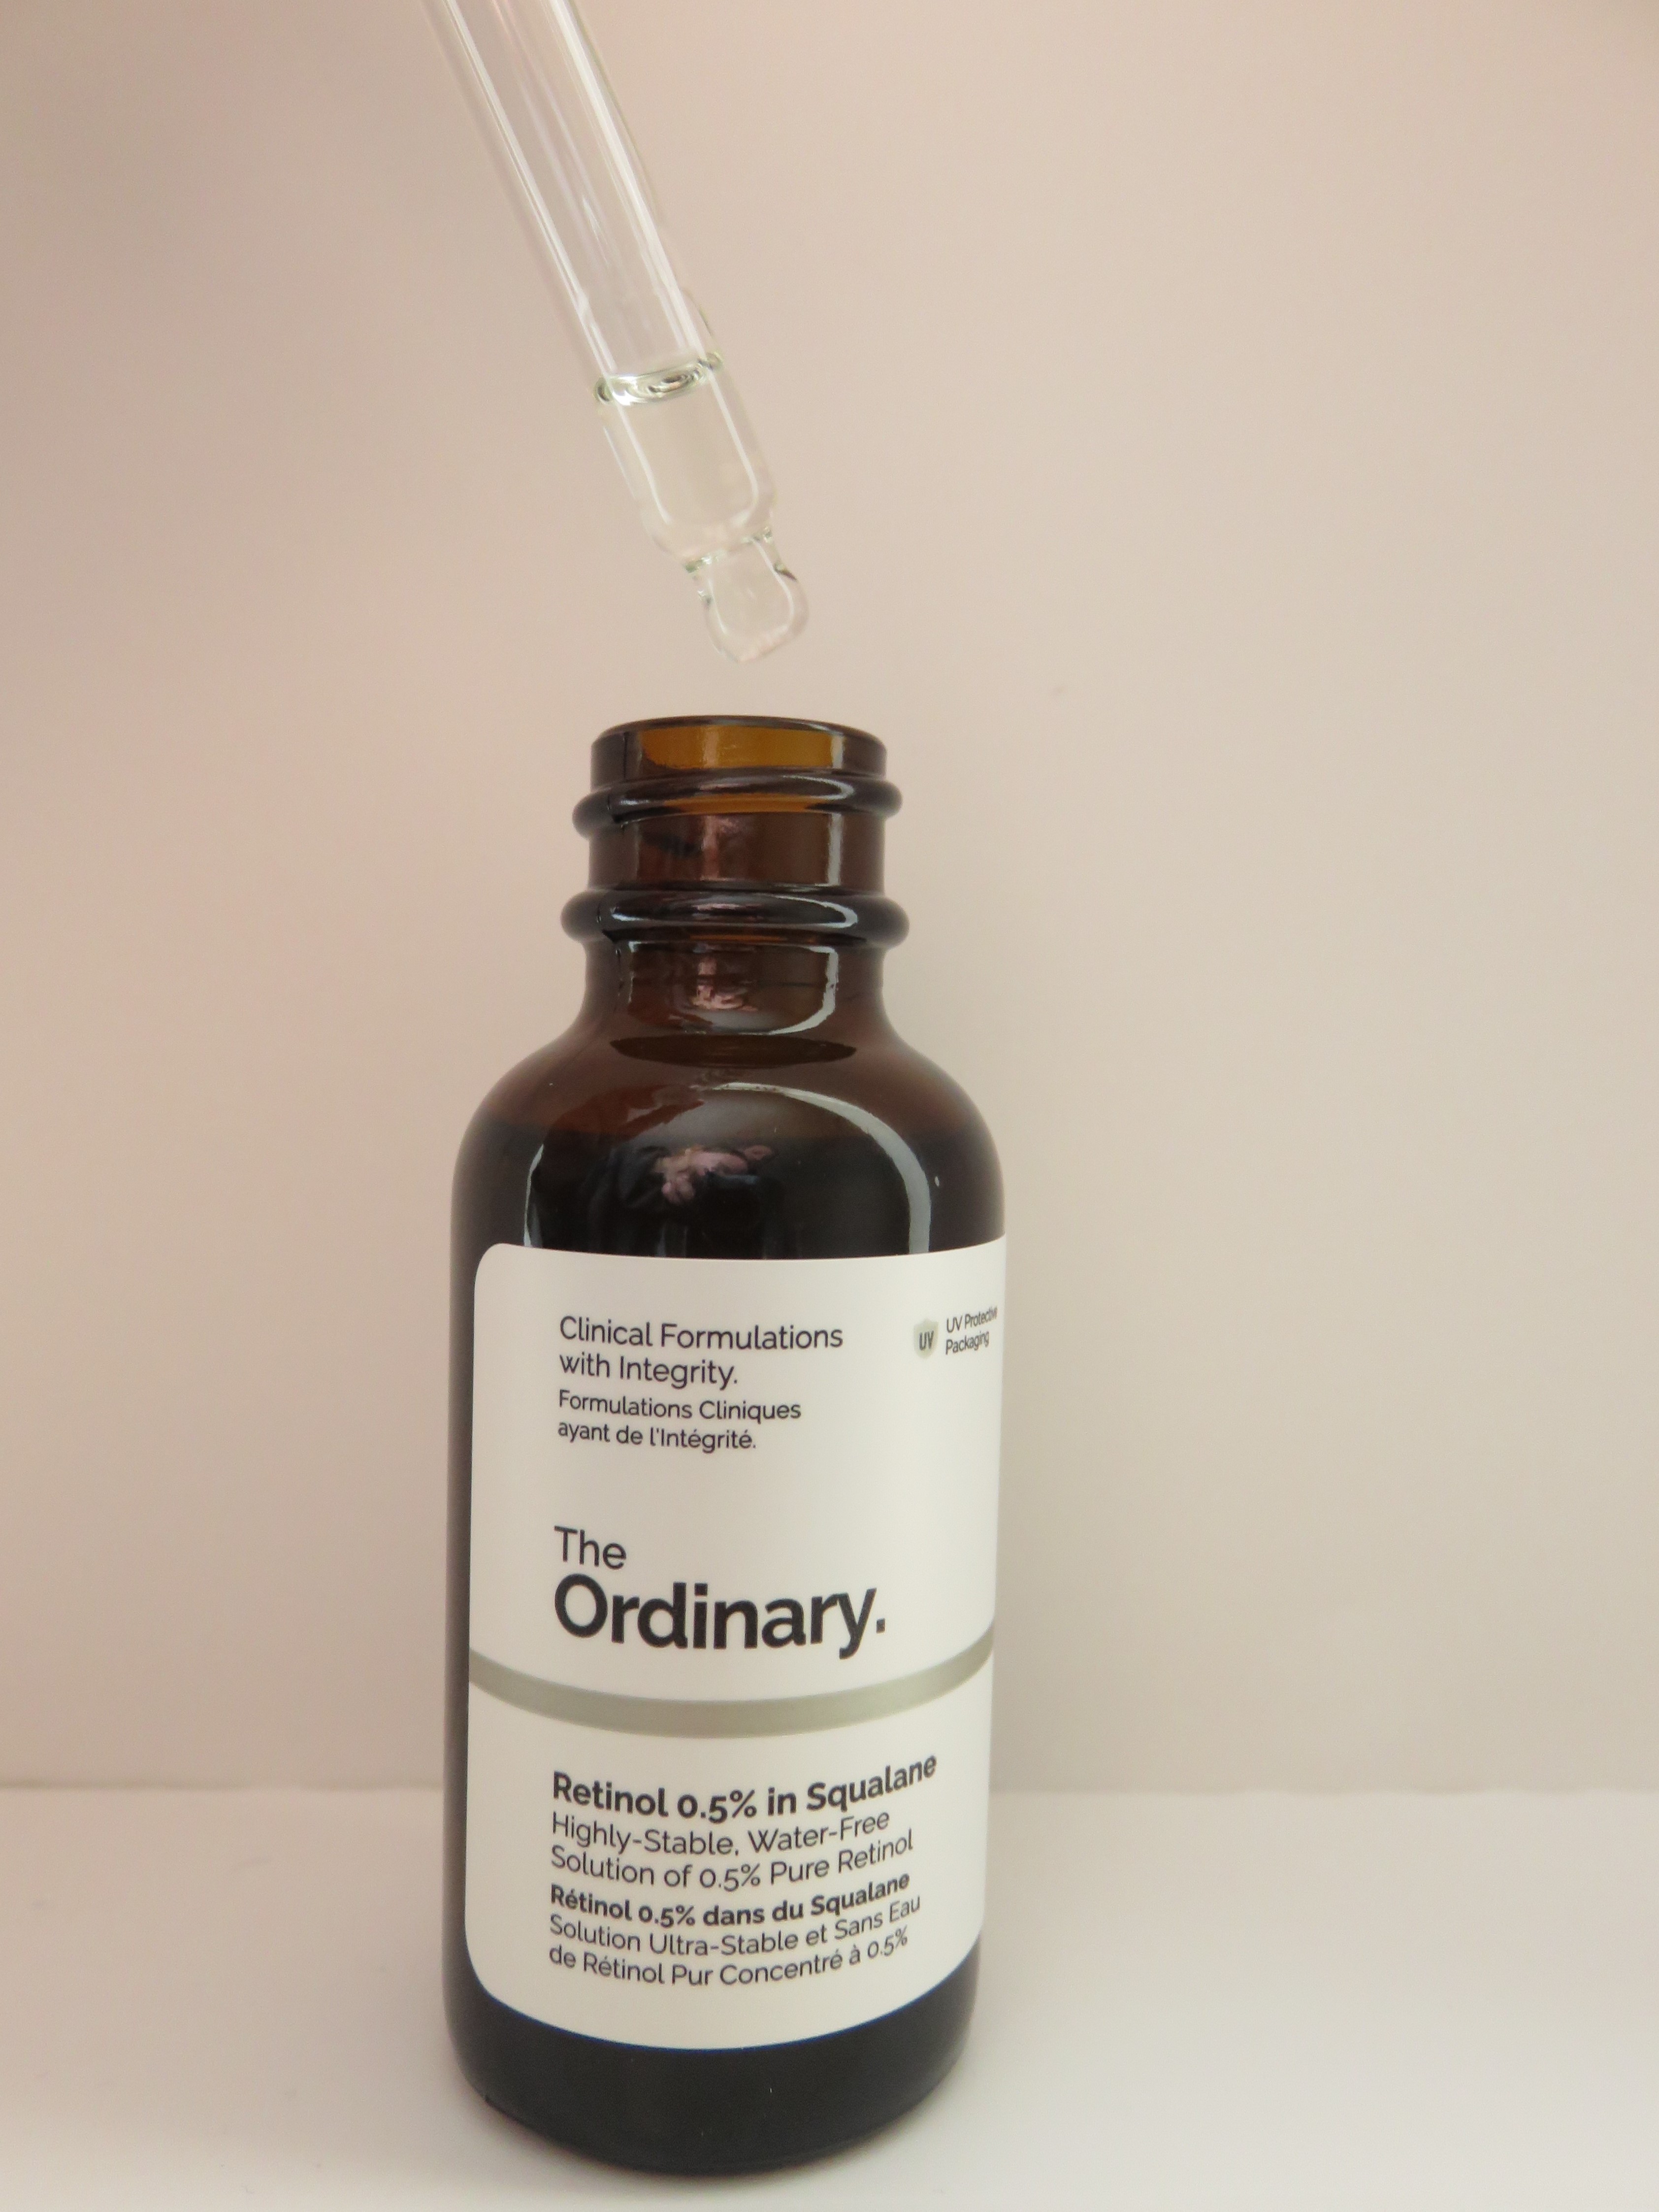 henvise At dræbe Bourgogne Review of The Ordinary's Retinol | How Beautiful Life Is